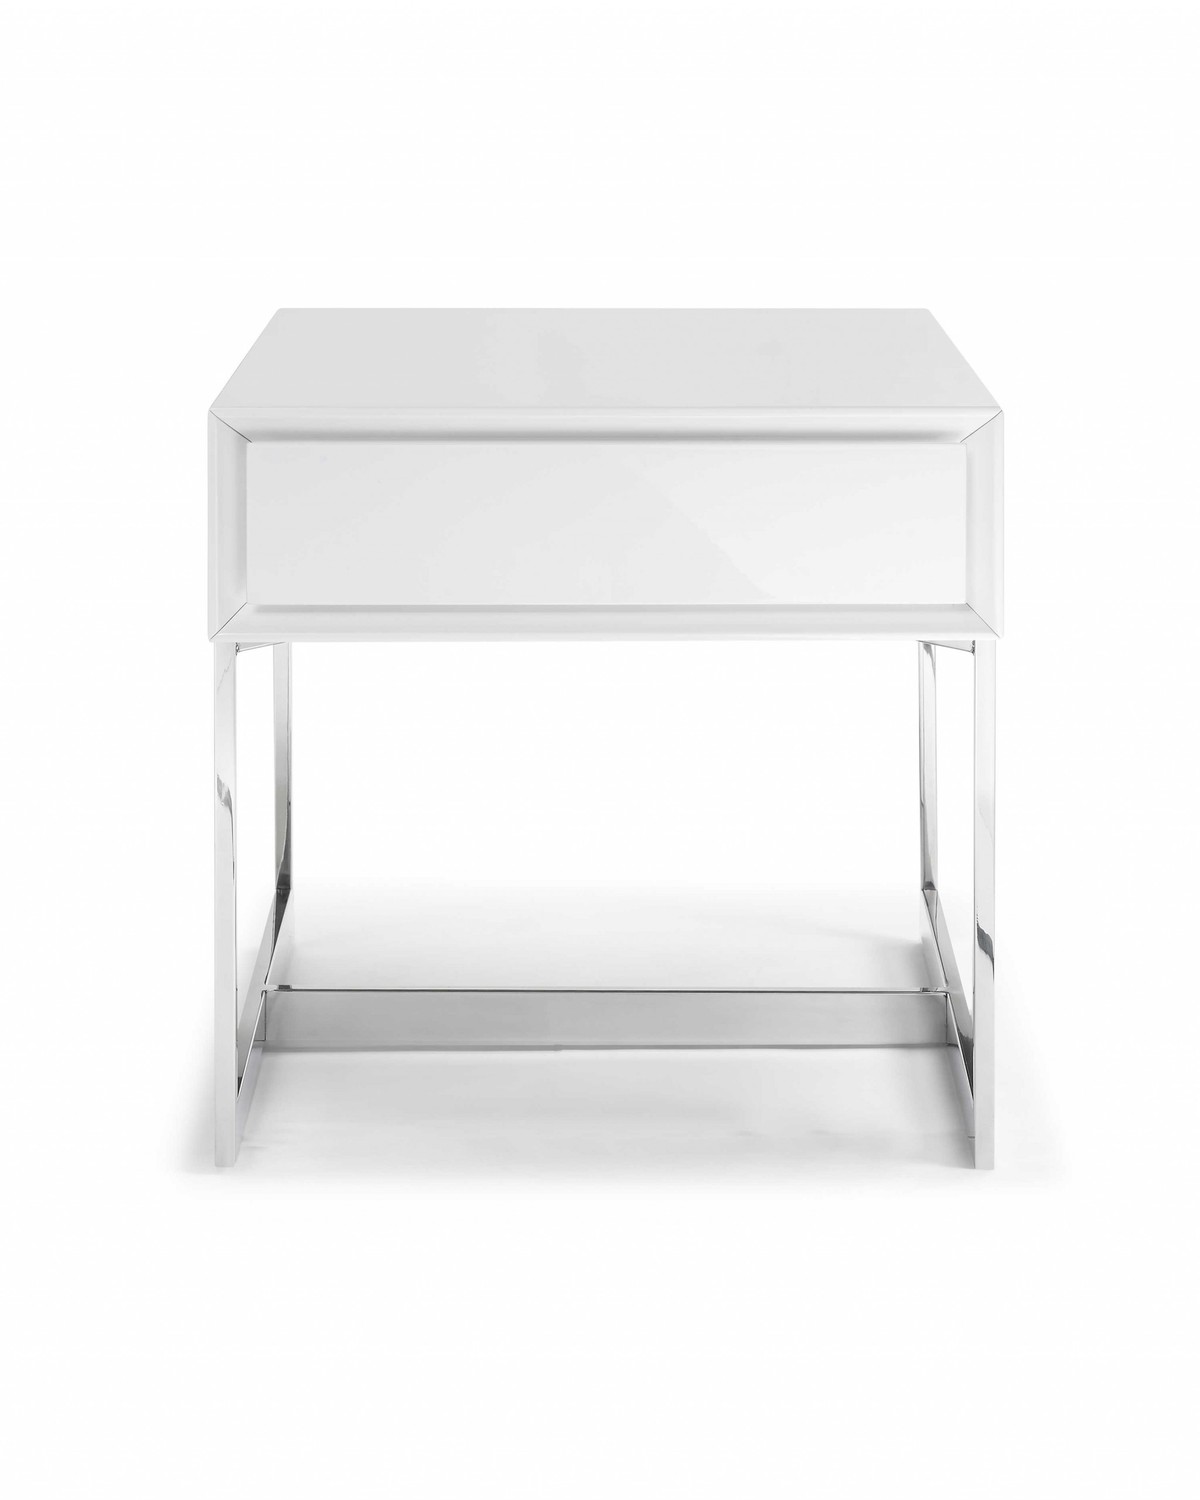 Side Table High Gloss White One Drawer Polished Stainless Steel Legs